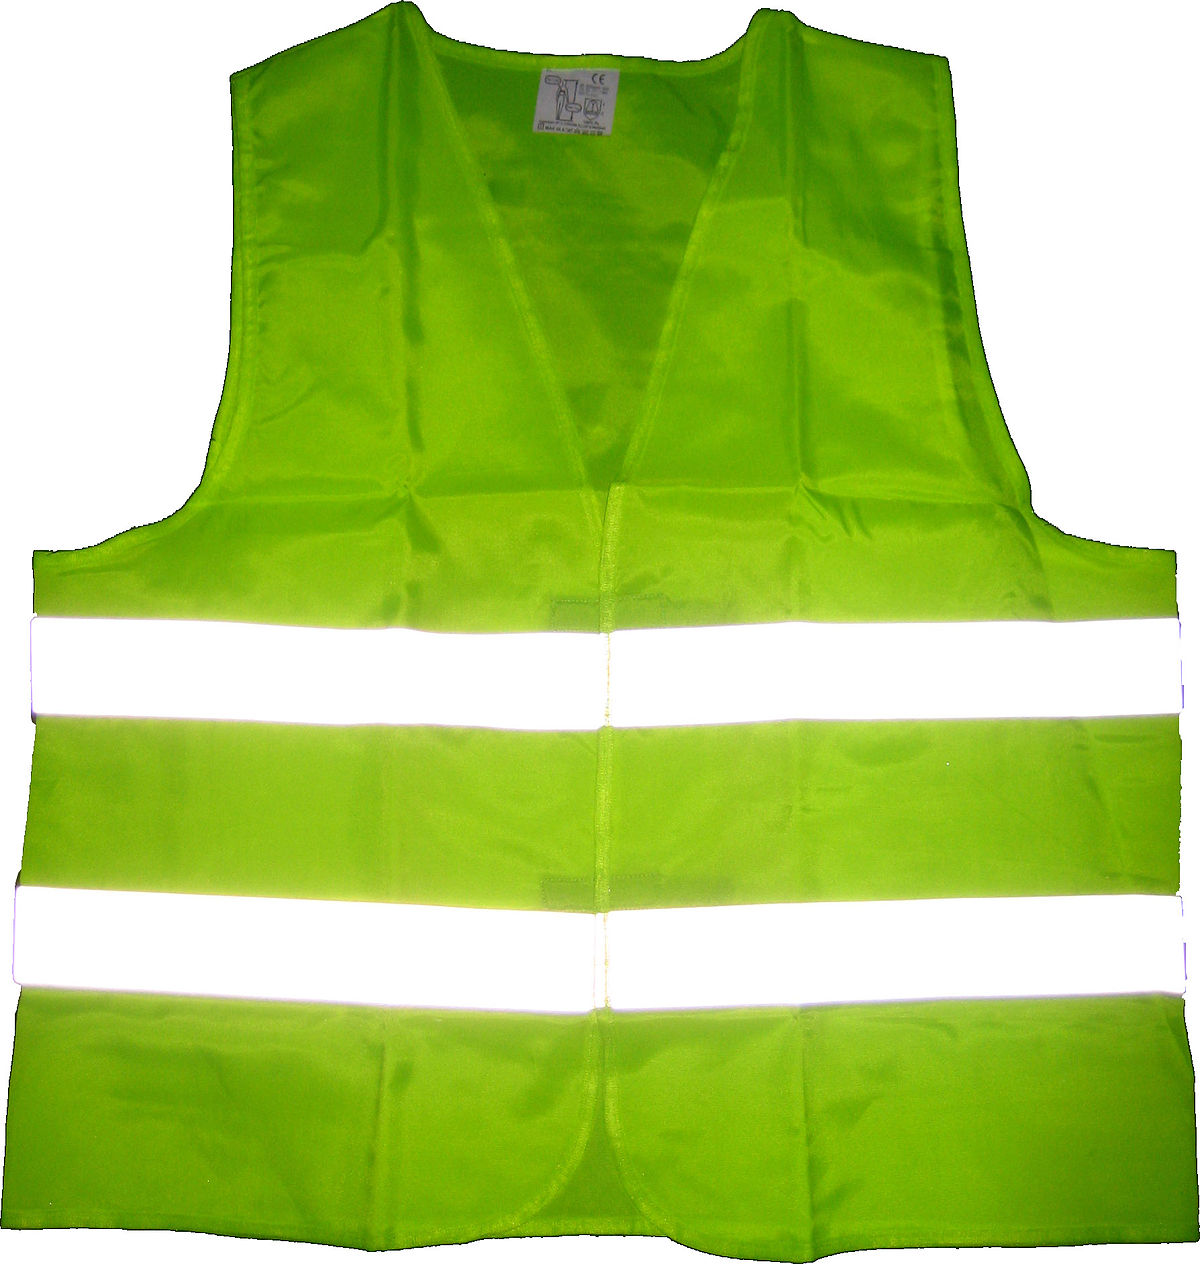 A person wearing a reflective safety vest